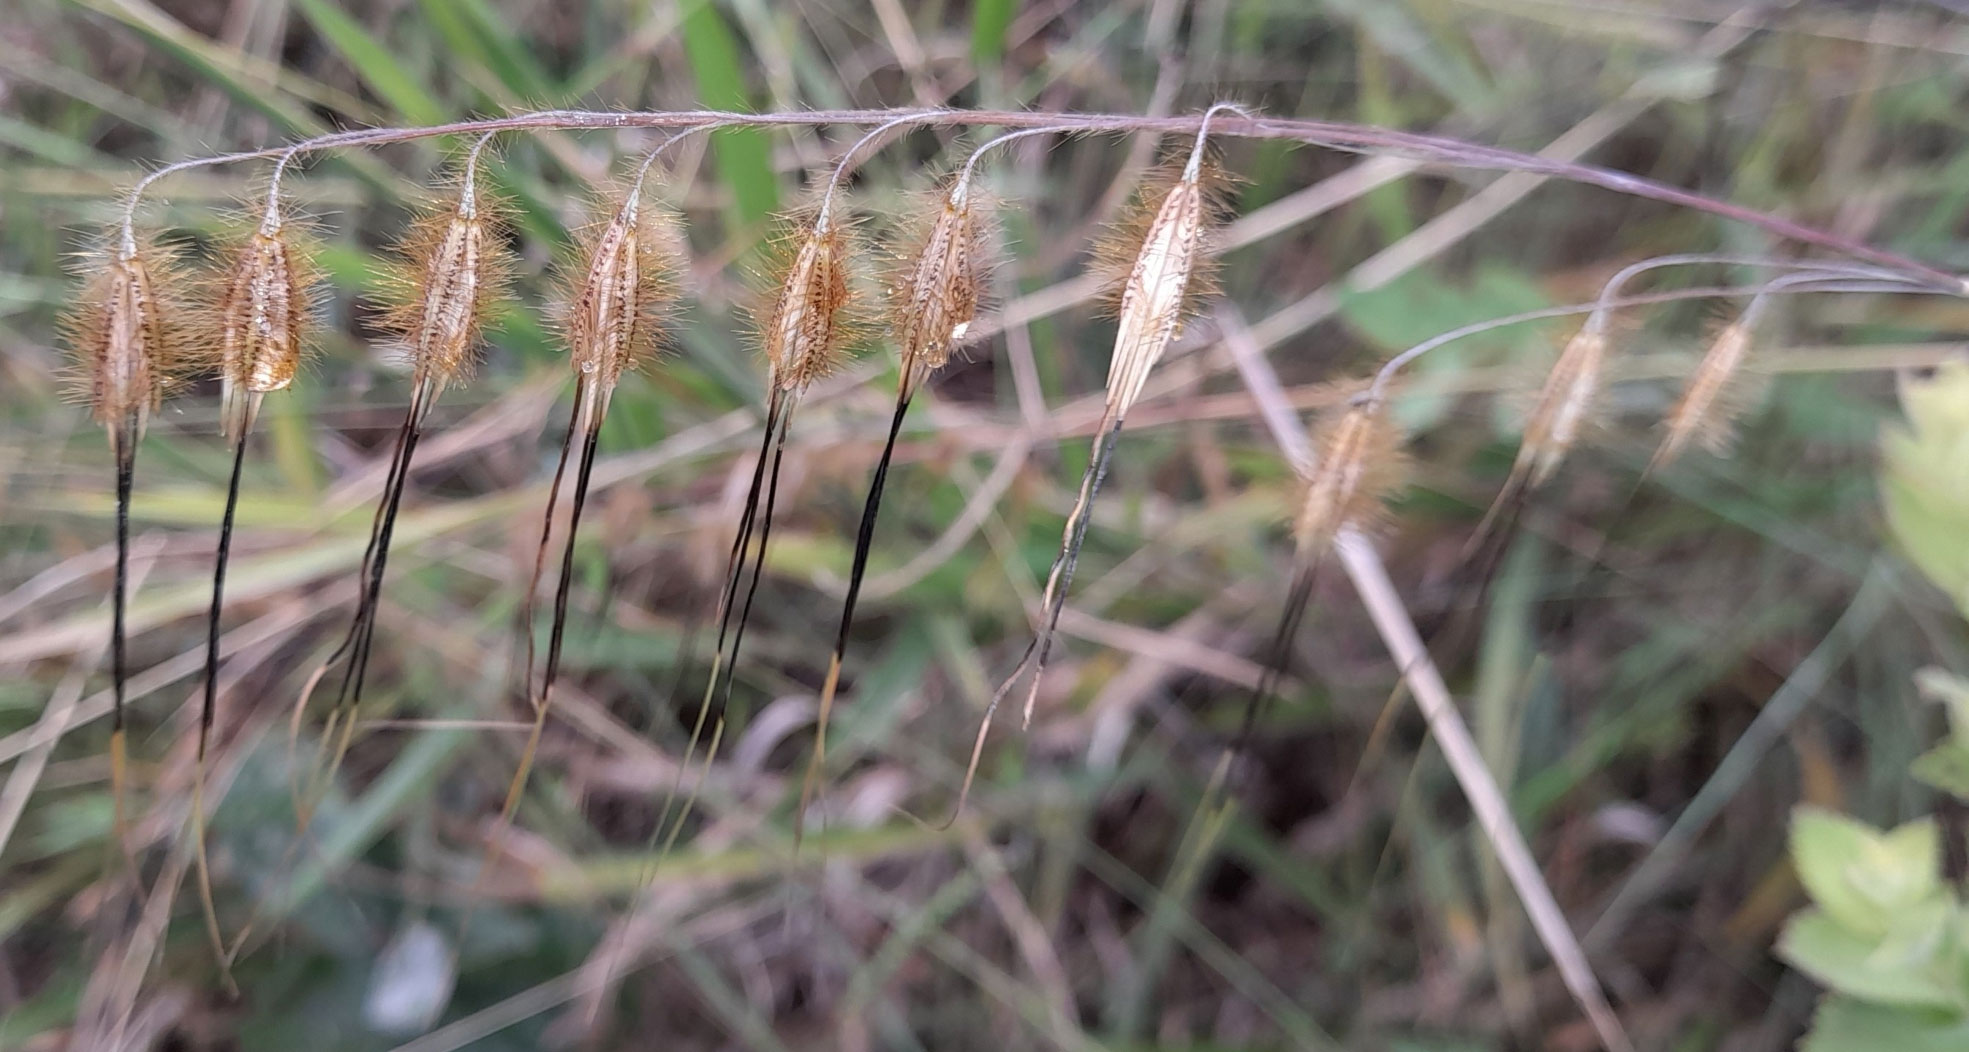 Photograph of the inflorescence of Loudetiopsis chrysothrix in Brazil. The photo shows a stem oriented horizontally across the image, bearing spikelets that are pointed toward the ground on one side. The spikelets are light brown with conspicuous hairs. The awns borne by the spikelets are long and black and light-colored tips.